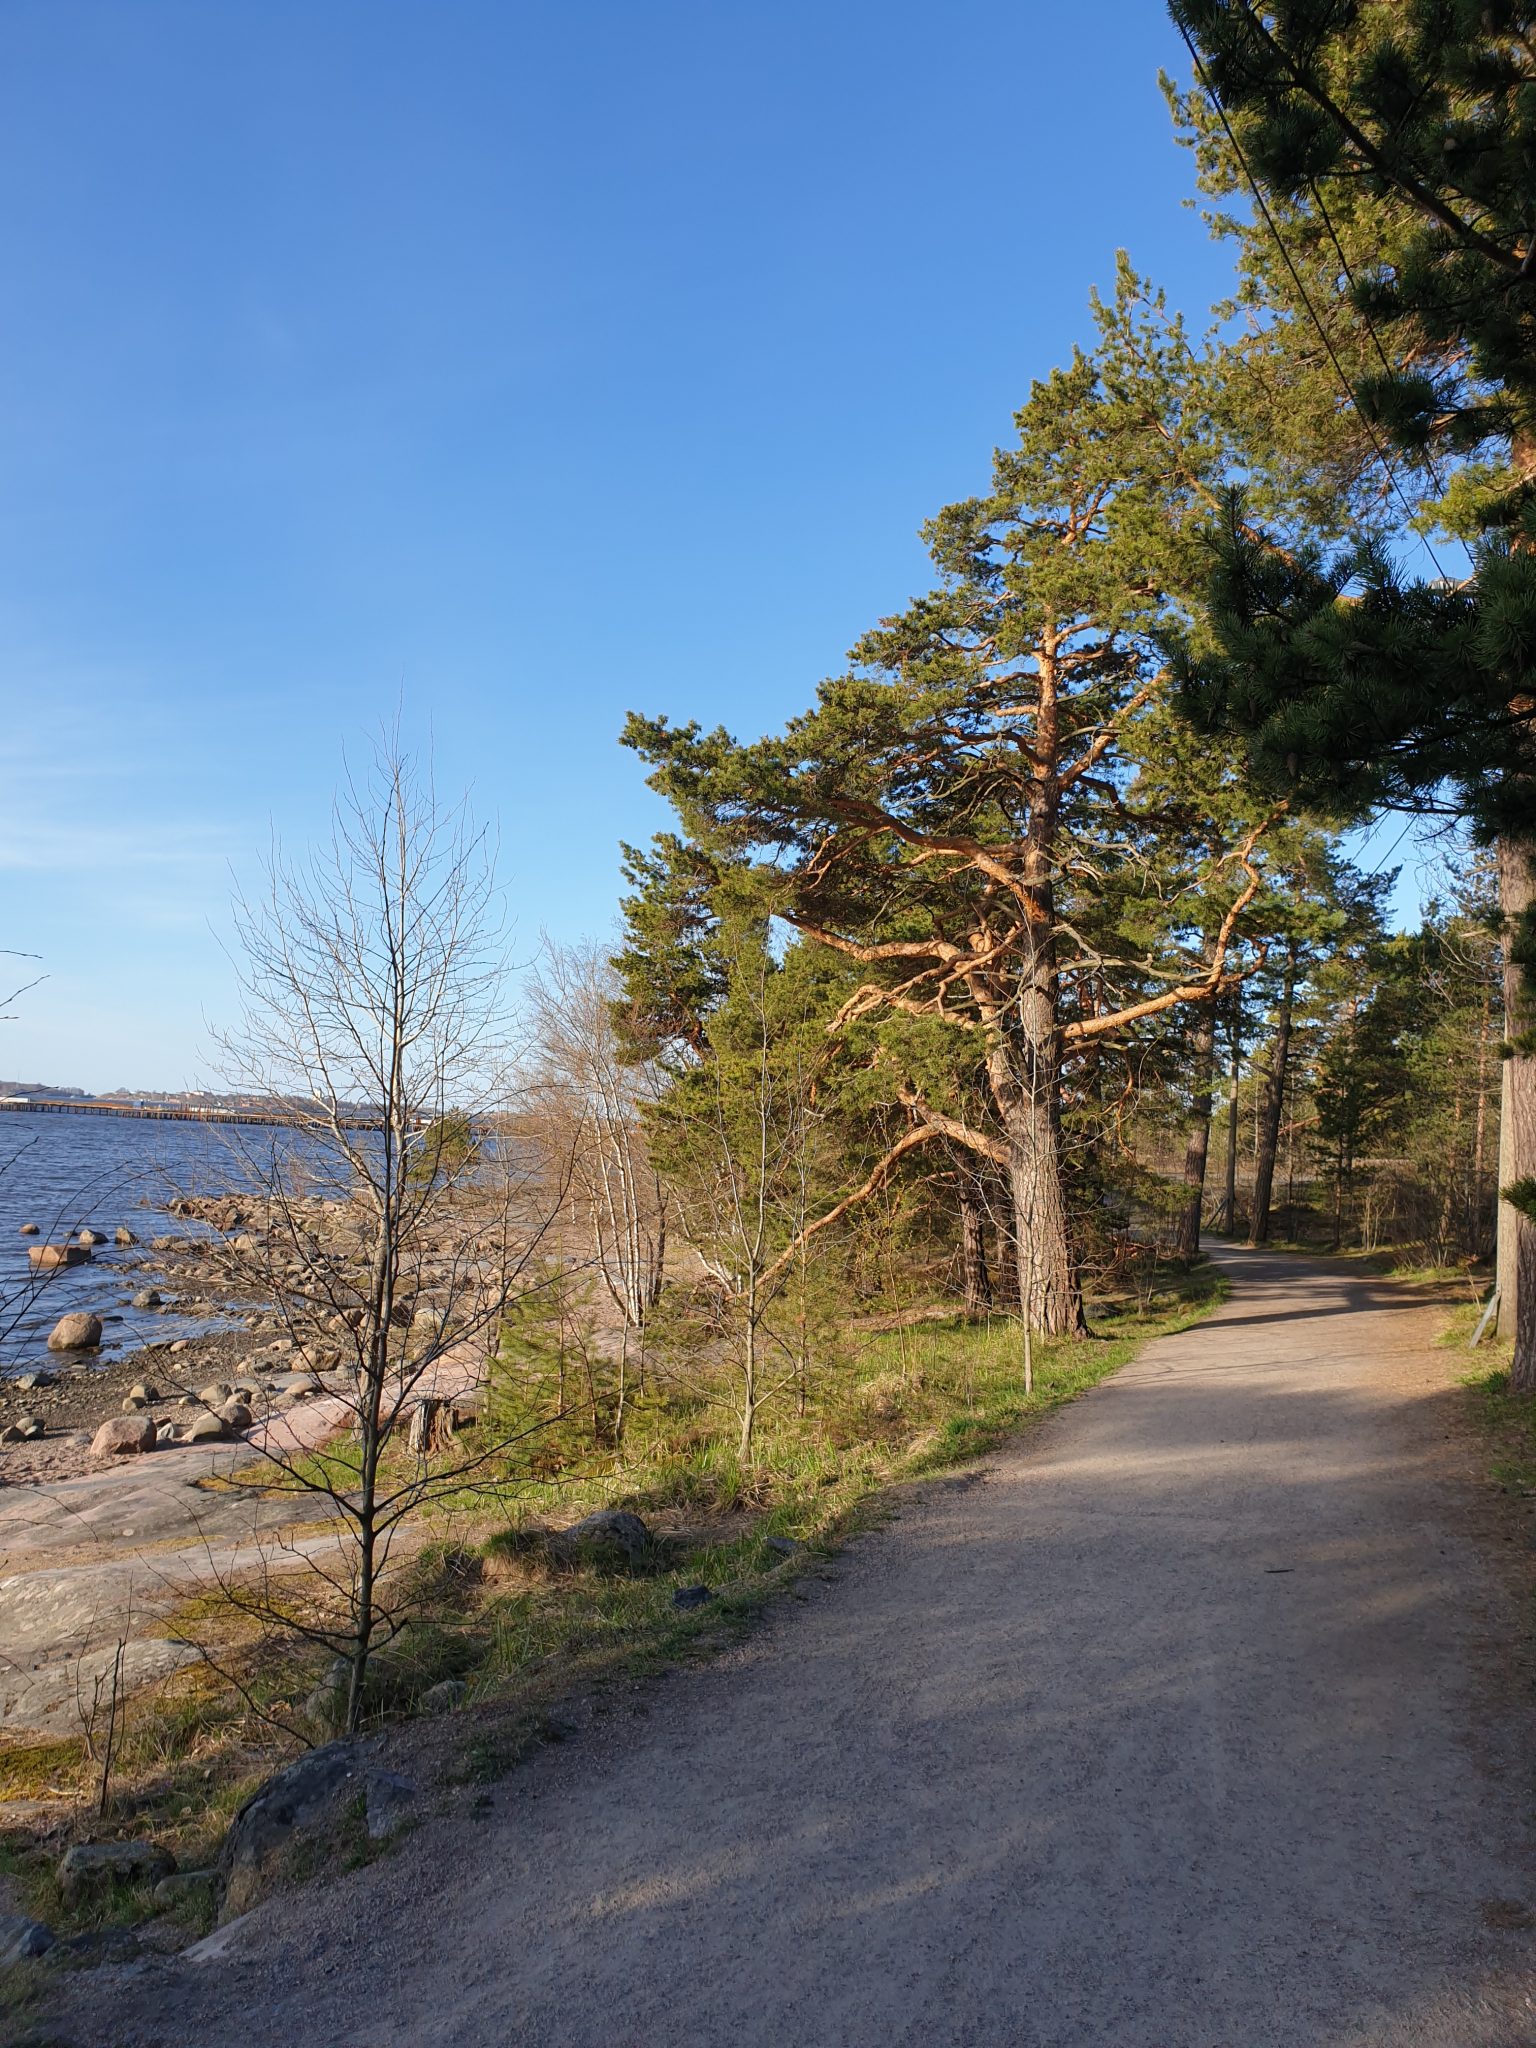 Landscape of a hiking trail with trees growing on each side of the trail. The trail is by the sea, which can be seen on the left side of the trail along with a rocky beach. The sky above is cloudless.